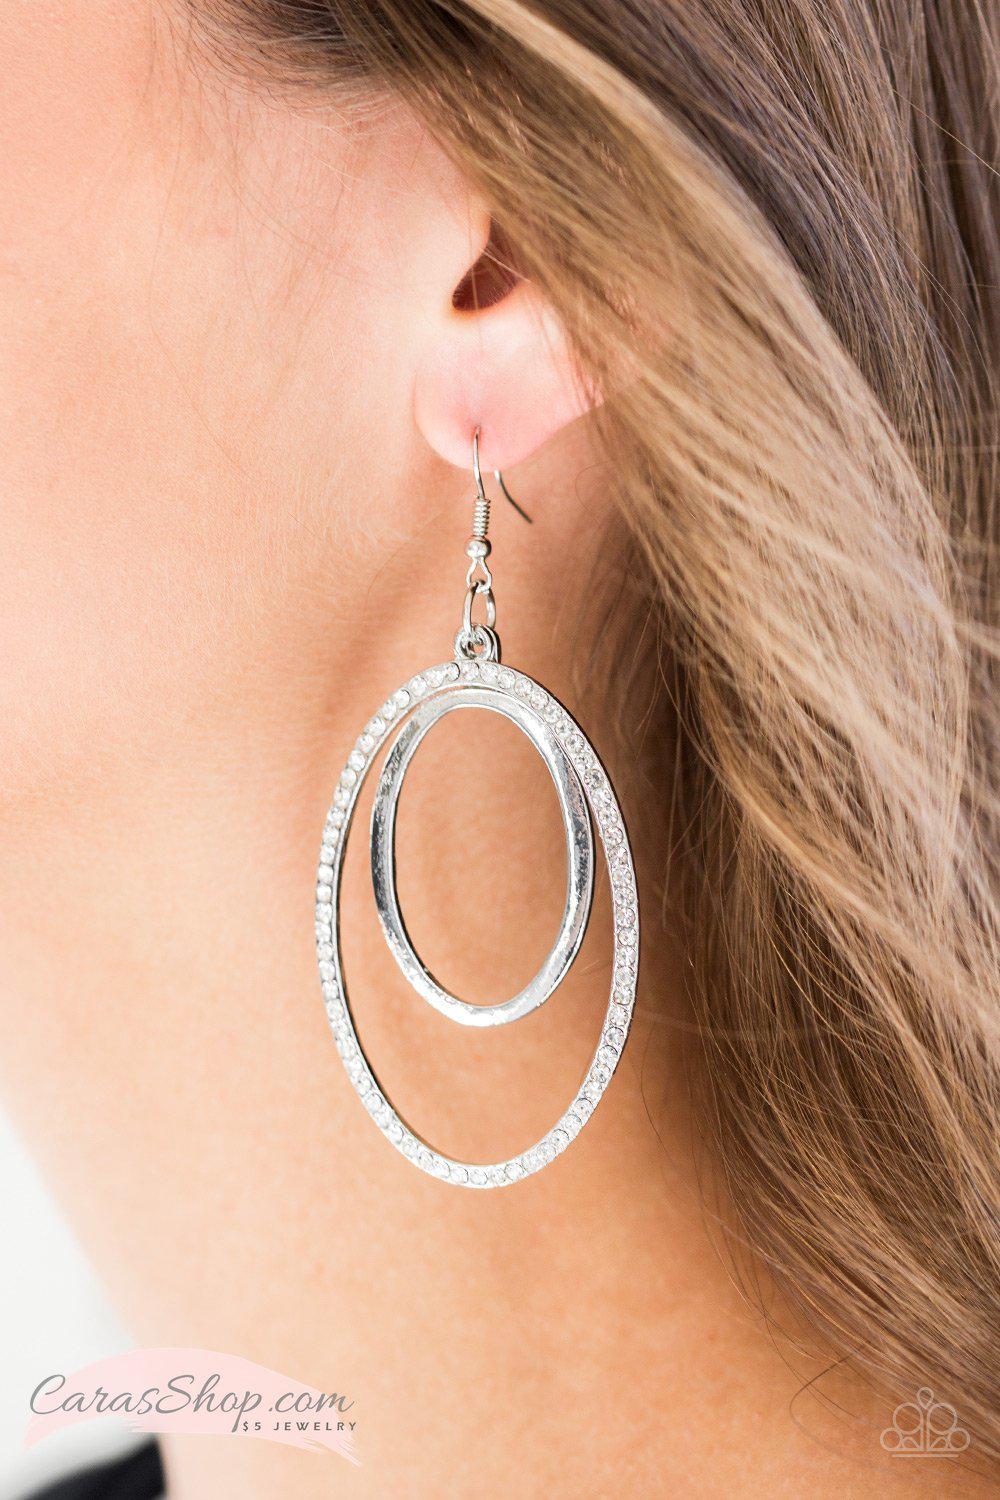 Wrapped In Wealth - Silver and White Rhinestone Earrings - Paparazzi Accessories-CarasShop.com - $5 Jewelry by Cara Jewels